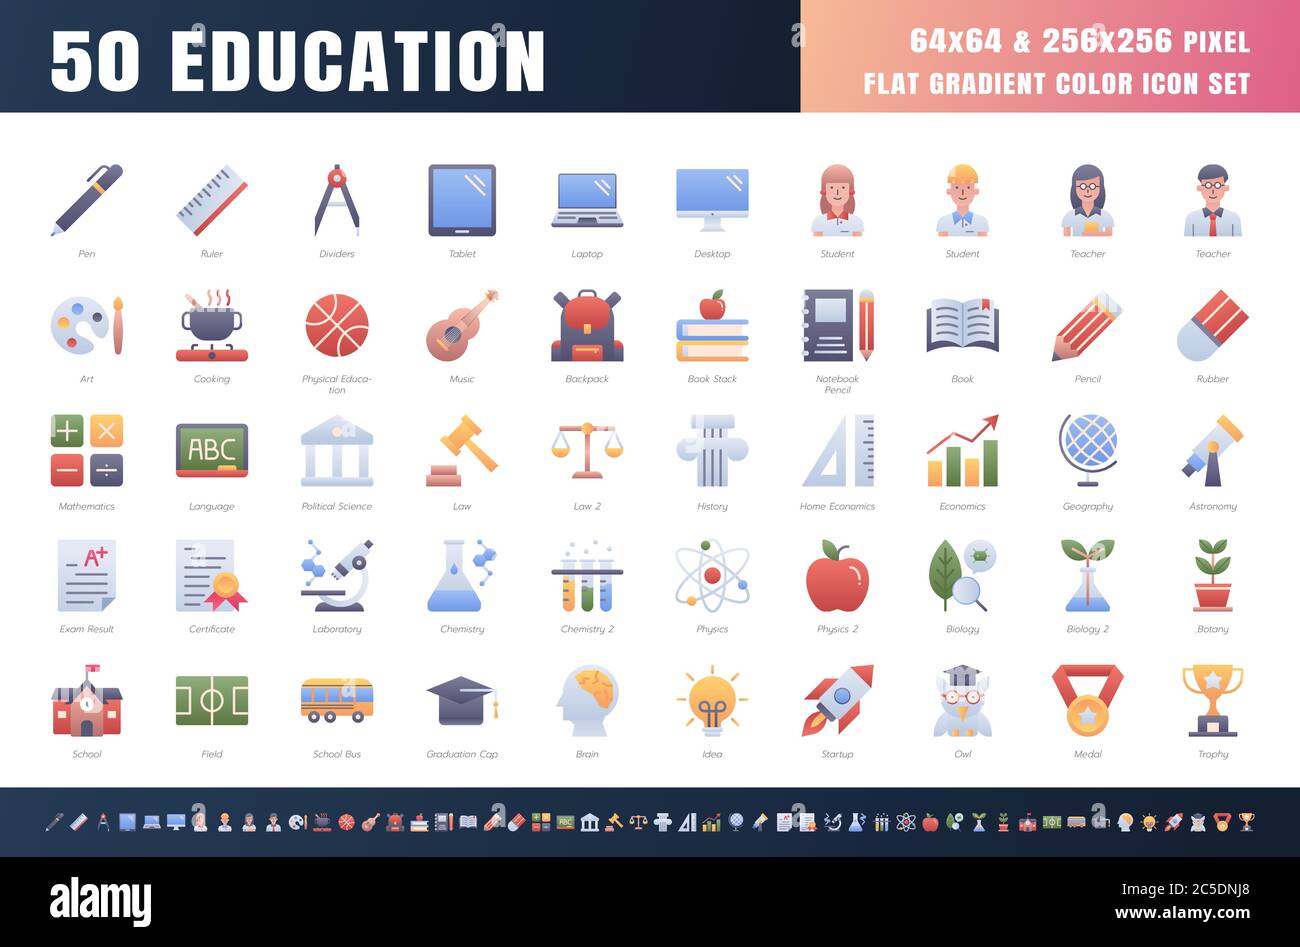 Vector of 50 Education and School Subject. Flat Gradient Color Icon Set. 64x64 and 256x256 Pixel. Vector. Stock Vector